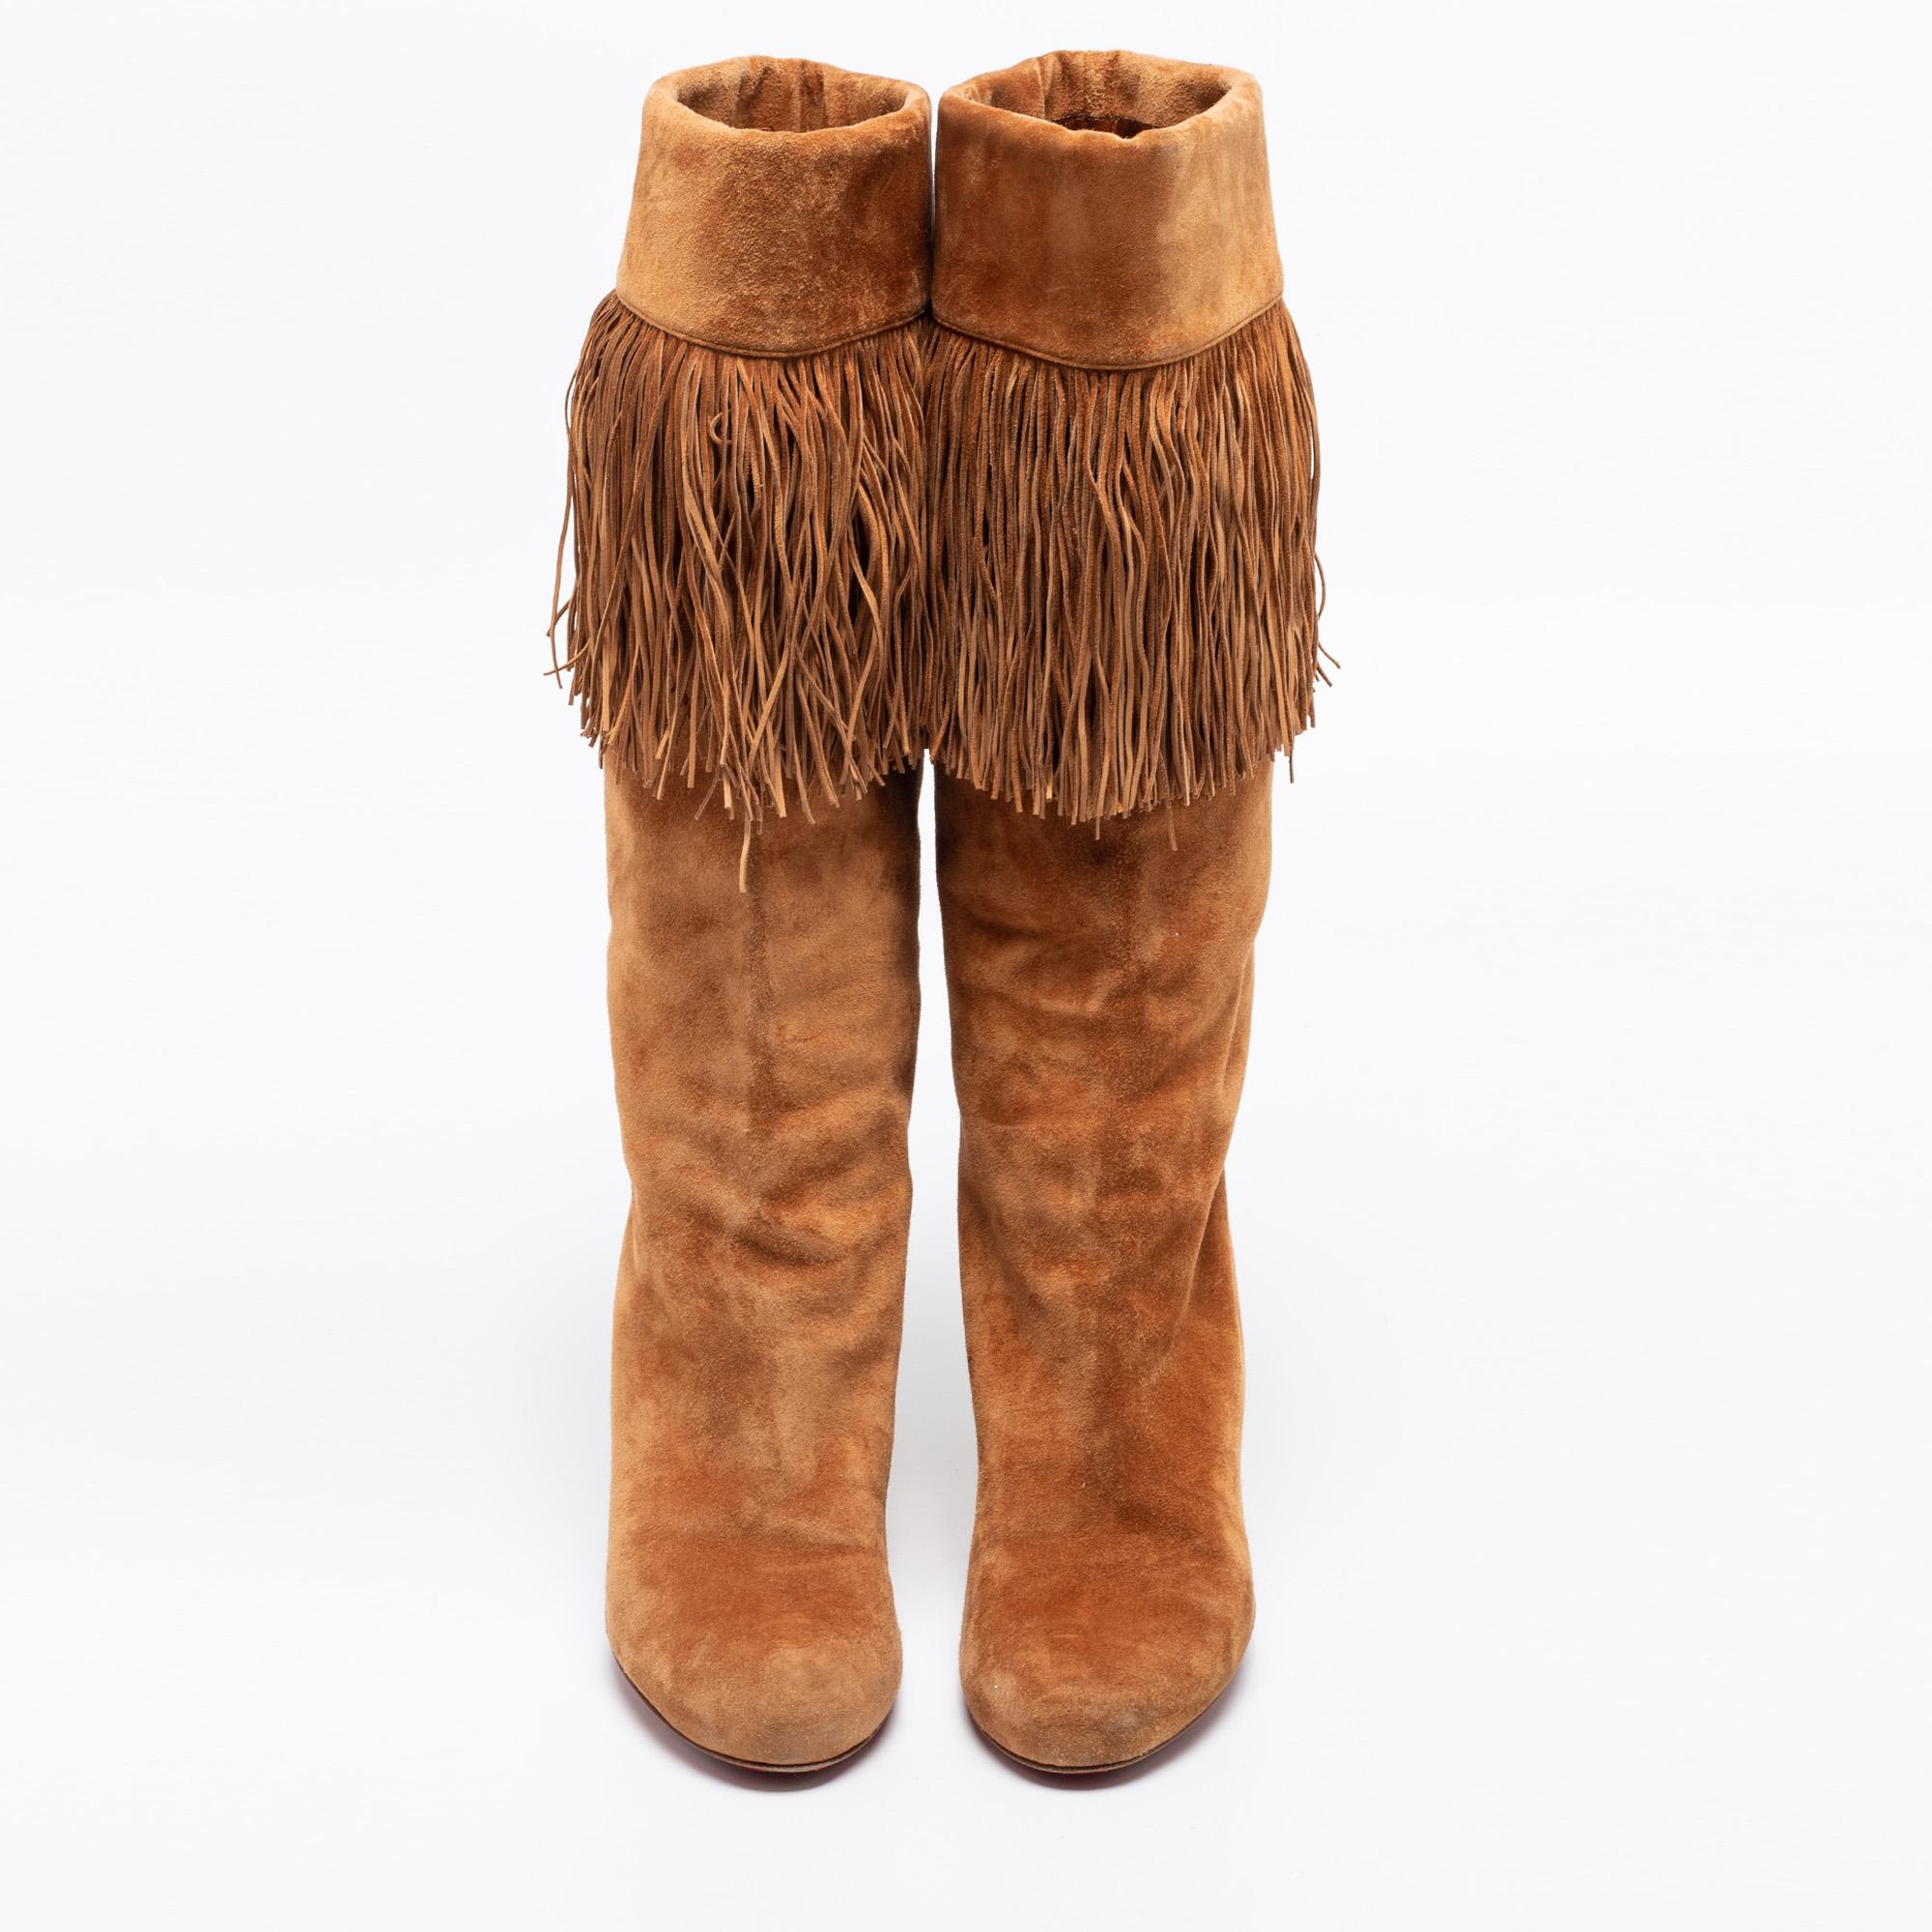 Opt for these brown mid-calf boots from Christian Louboutin if you're willing to take a step ahead and upgrade your fashion quotient. Crafted from suede, they feature fabulous fringe details and 9 cm heels. Rounded toes and comfortable leather